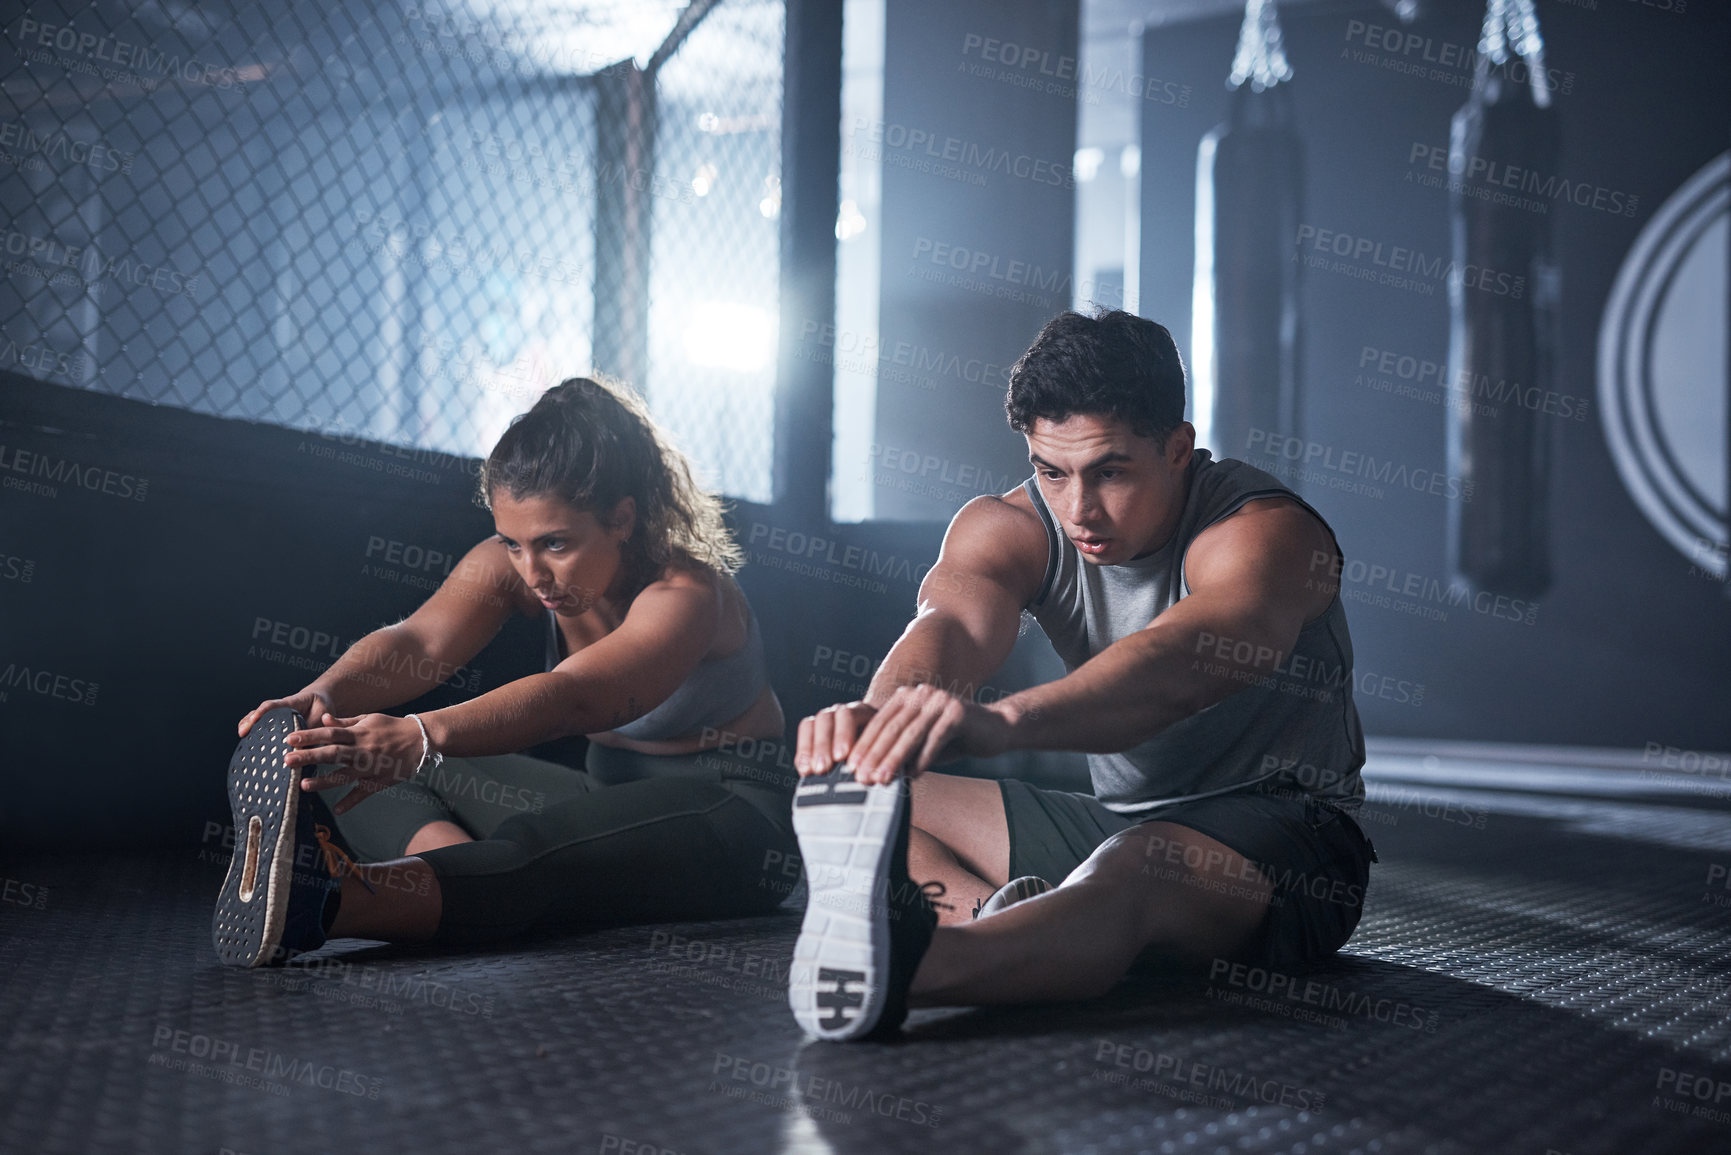 Buy stock photo Shot of two sporty young people exercising together in a gym